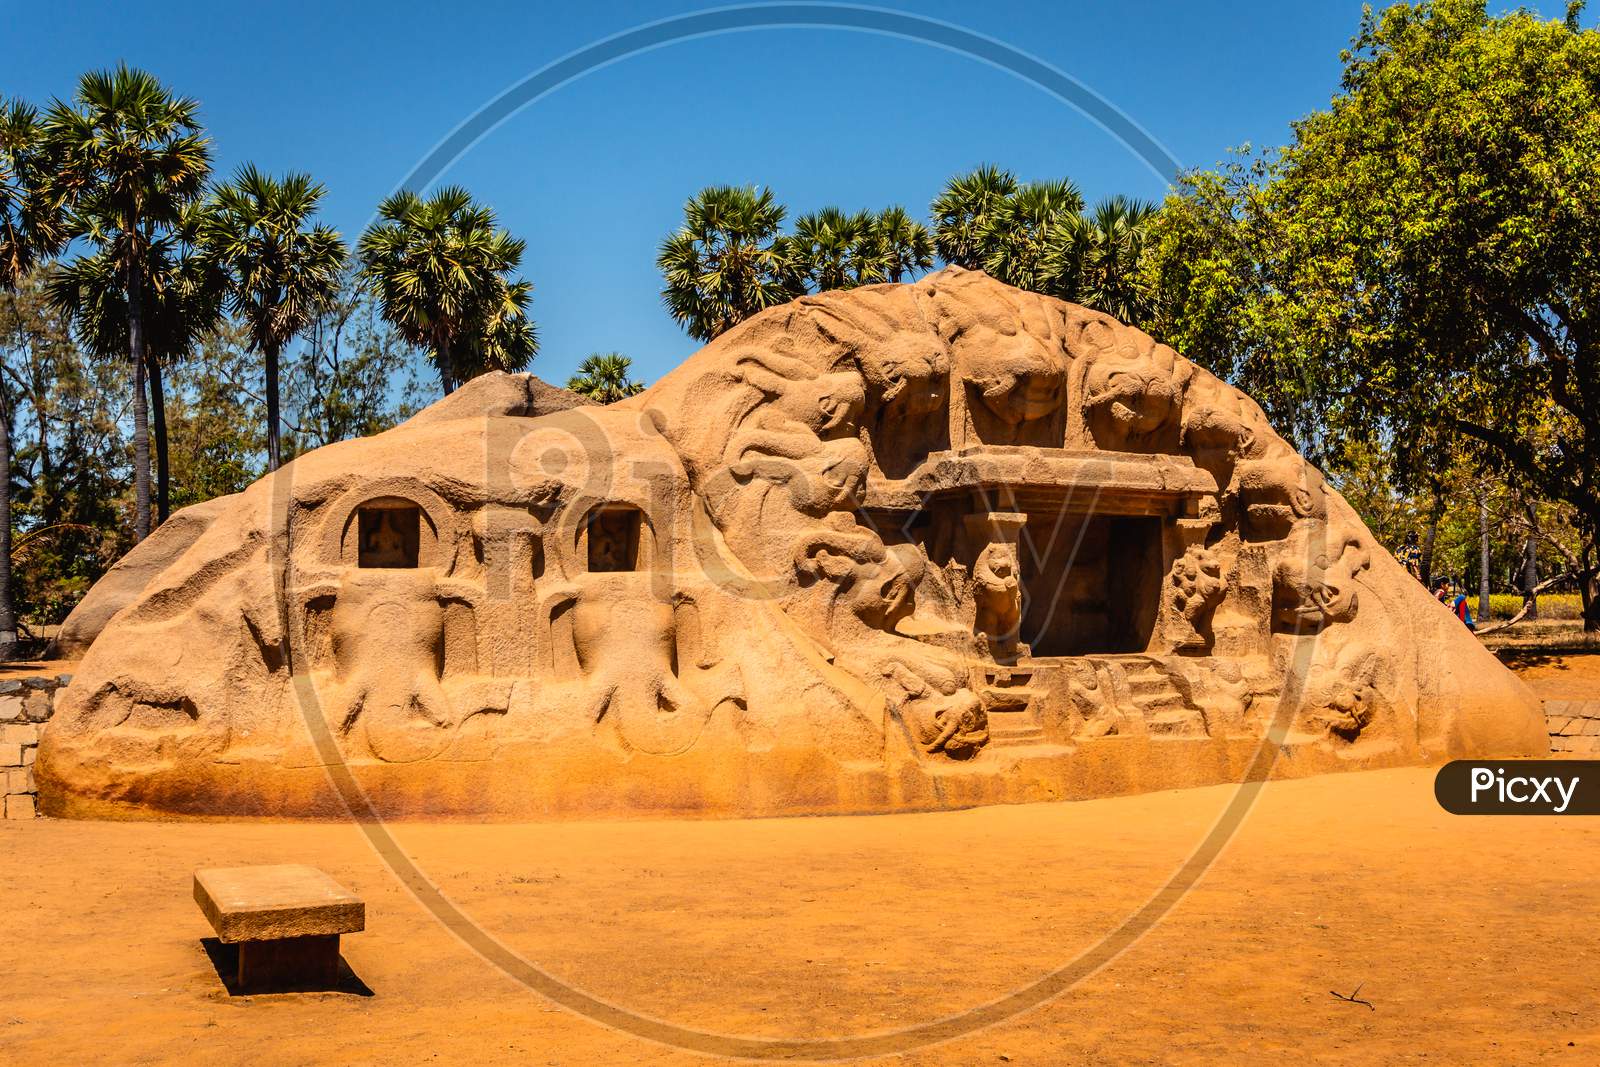 The Tiger Cave - carvings of tiger heads on the mouth of a cave is a rock-cut temple located in the hamlet of Saluvankuppam near Mahabalipuram in Tamil Nadu, South India